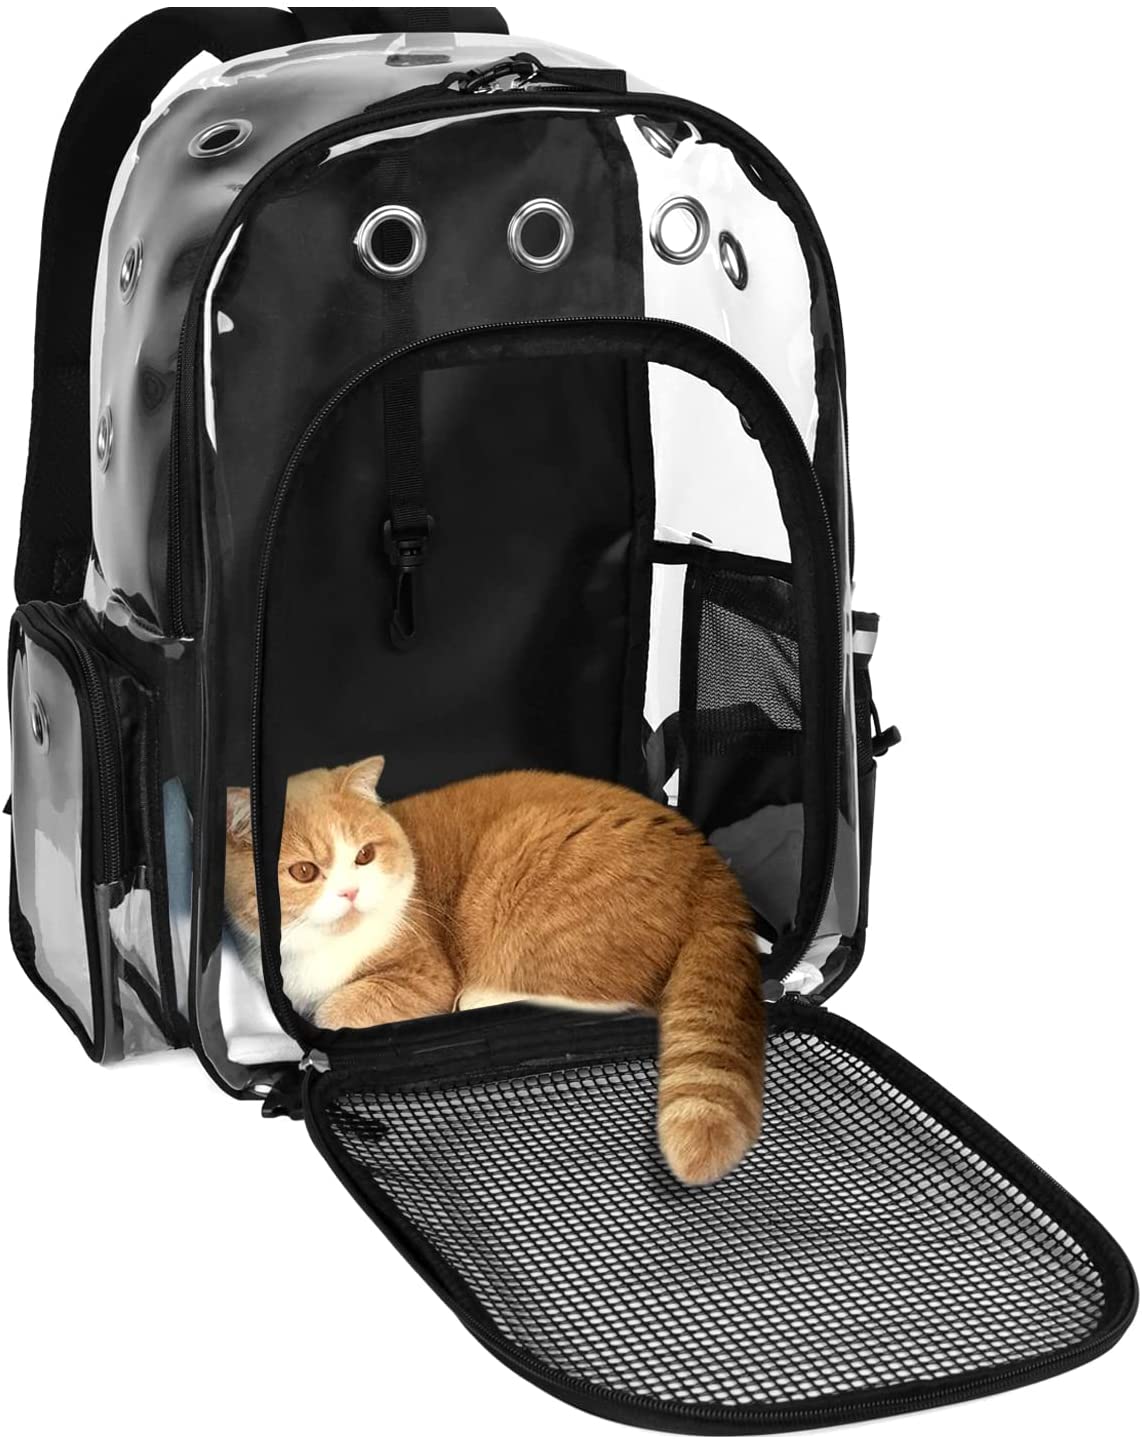 KIKA Pets CLEAR dog cat backpack carrier showing cat inside the bag